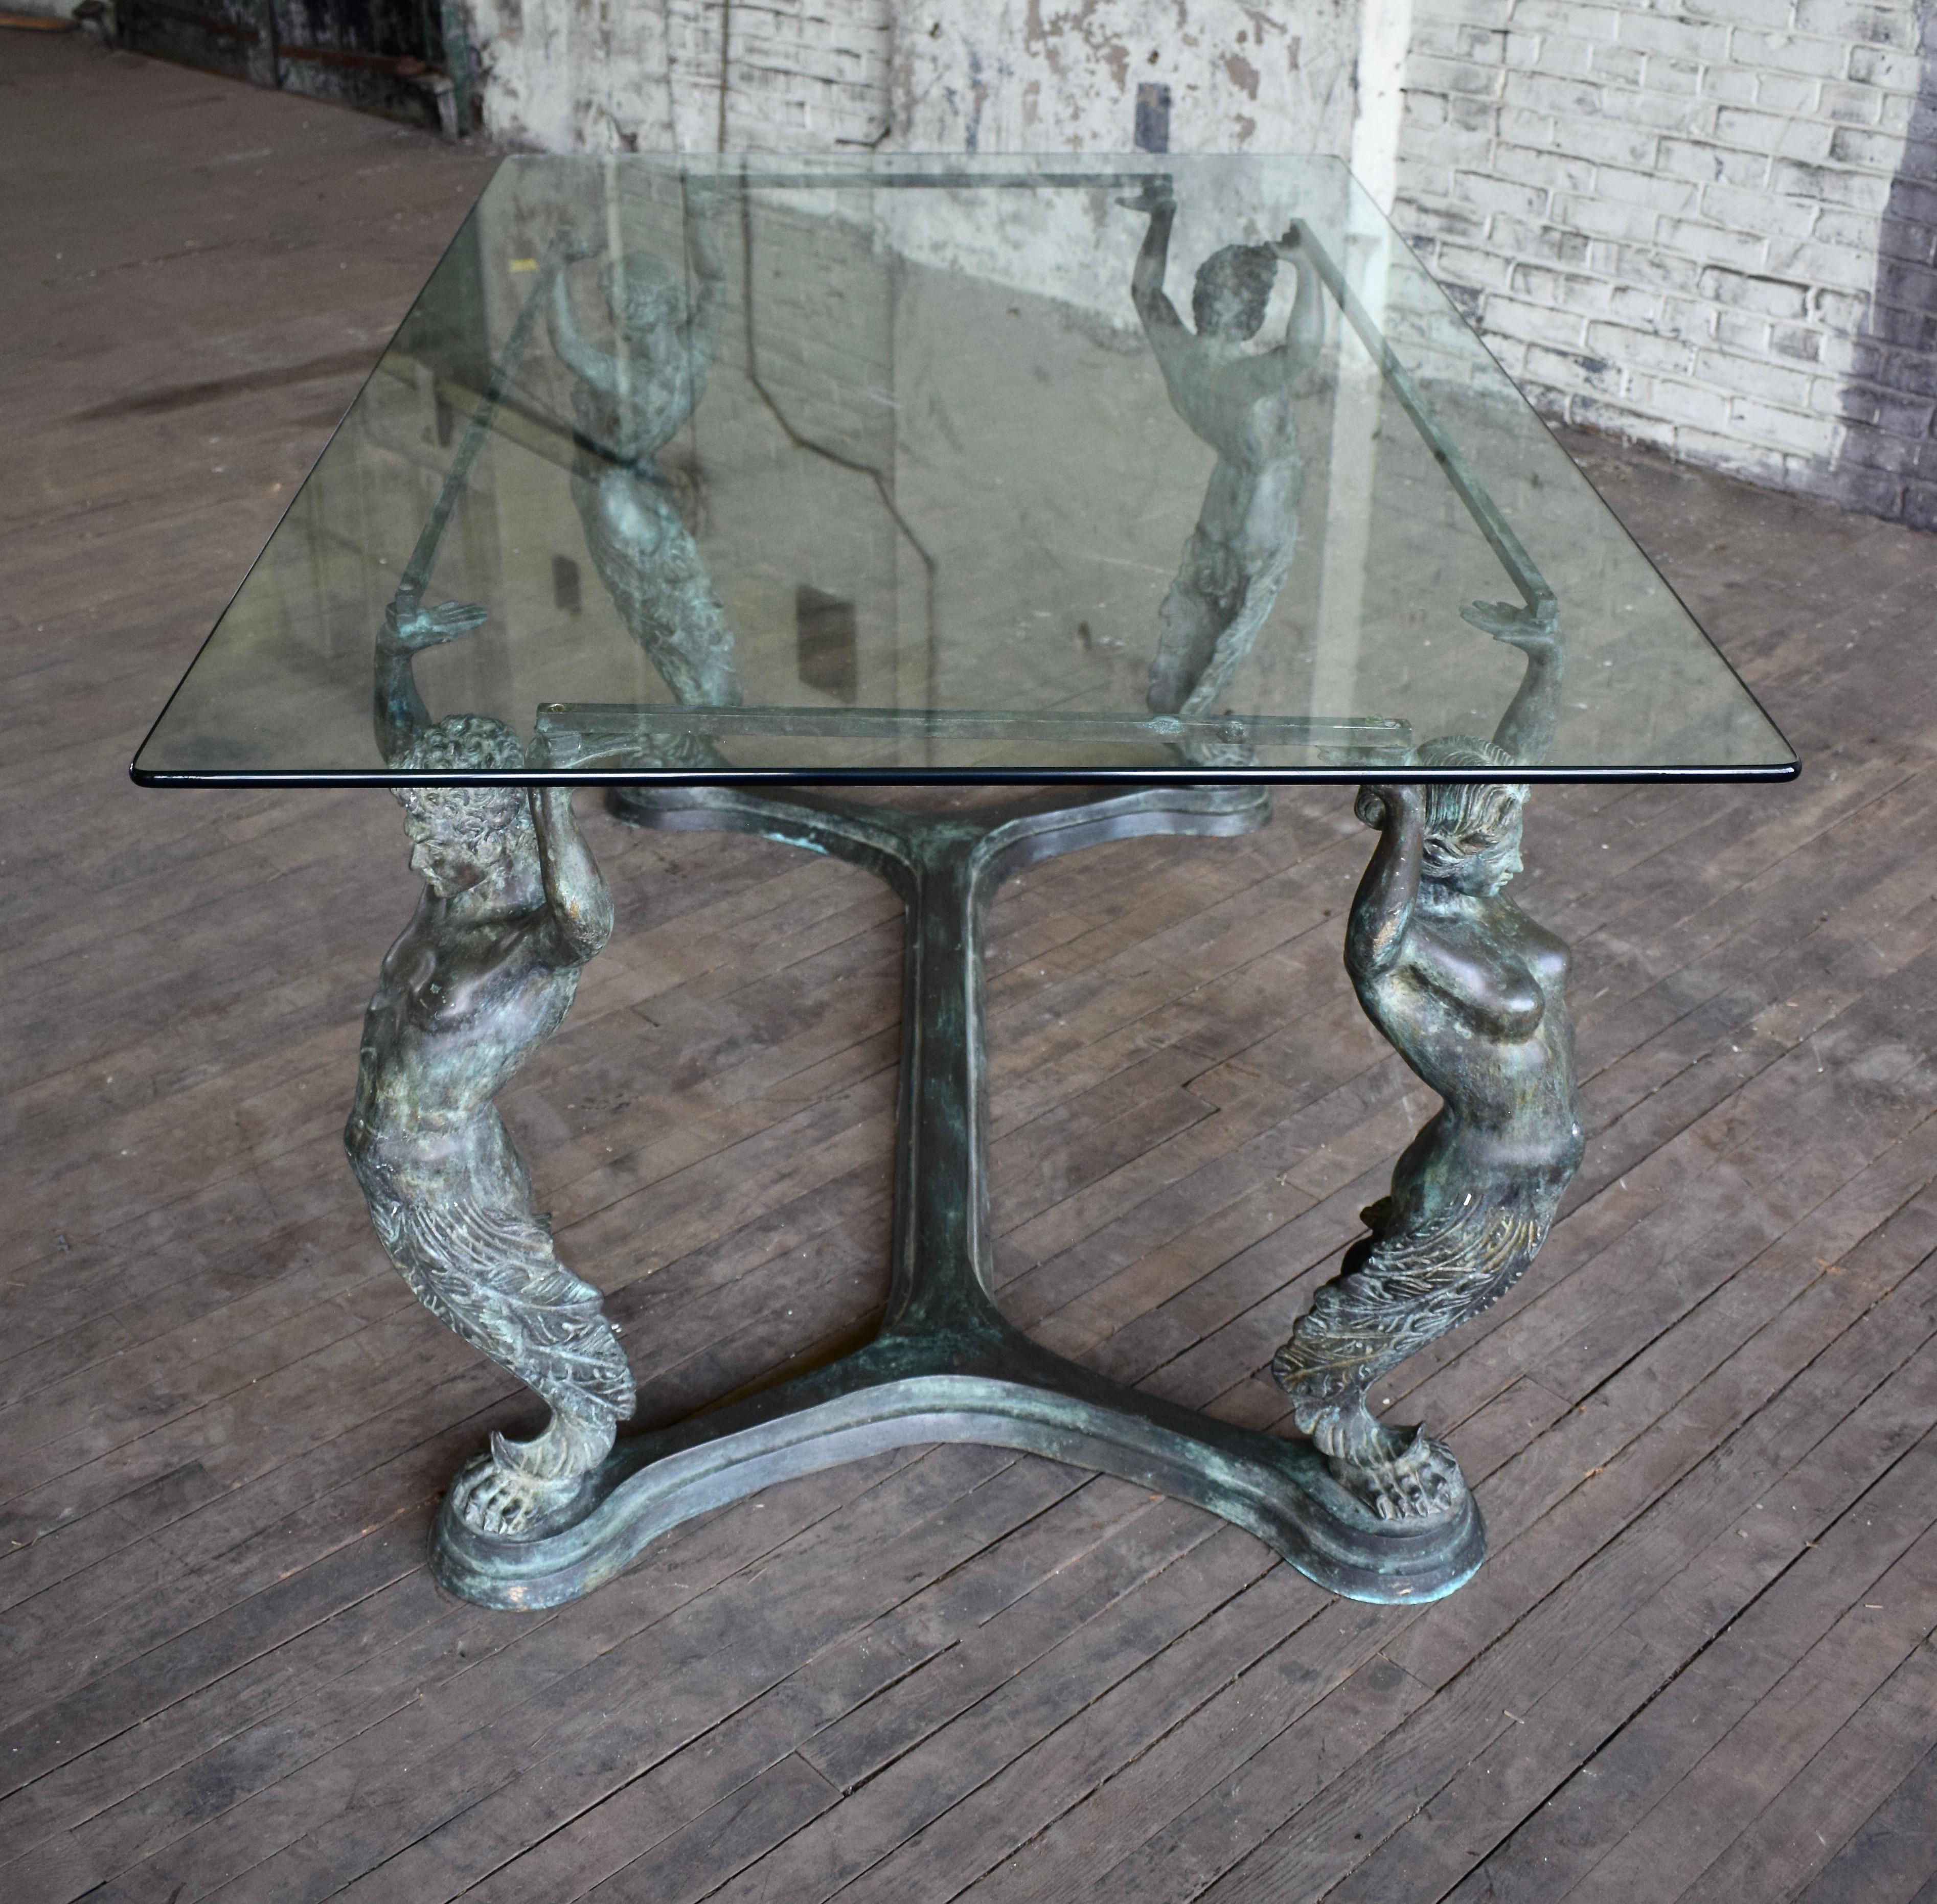 A very special & unusual Italian bronze dining table depicting four supporting Caryatid & Atlas figures with outstretched arms suspending a floating glass top. Base measurements 60